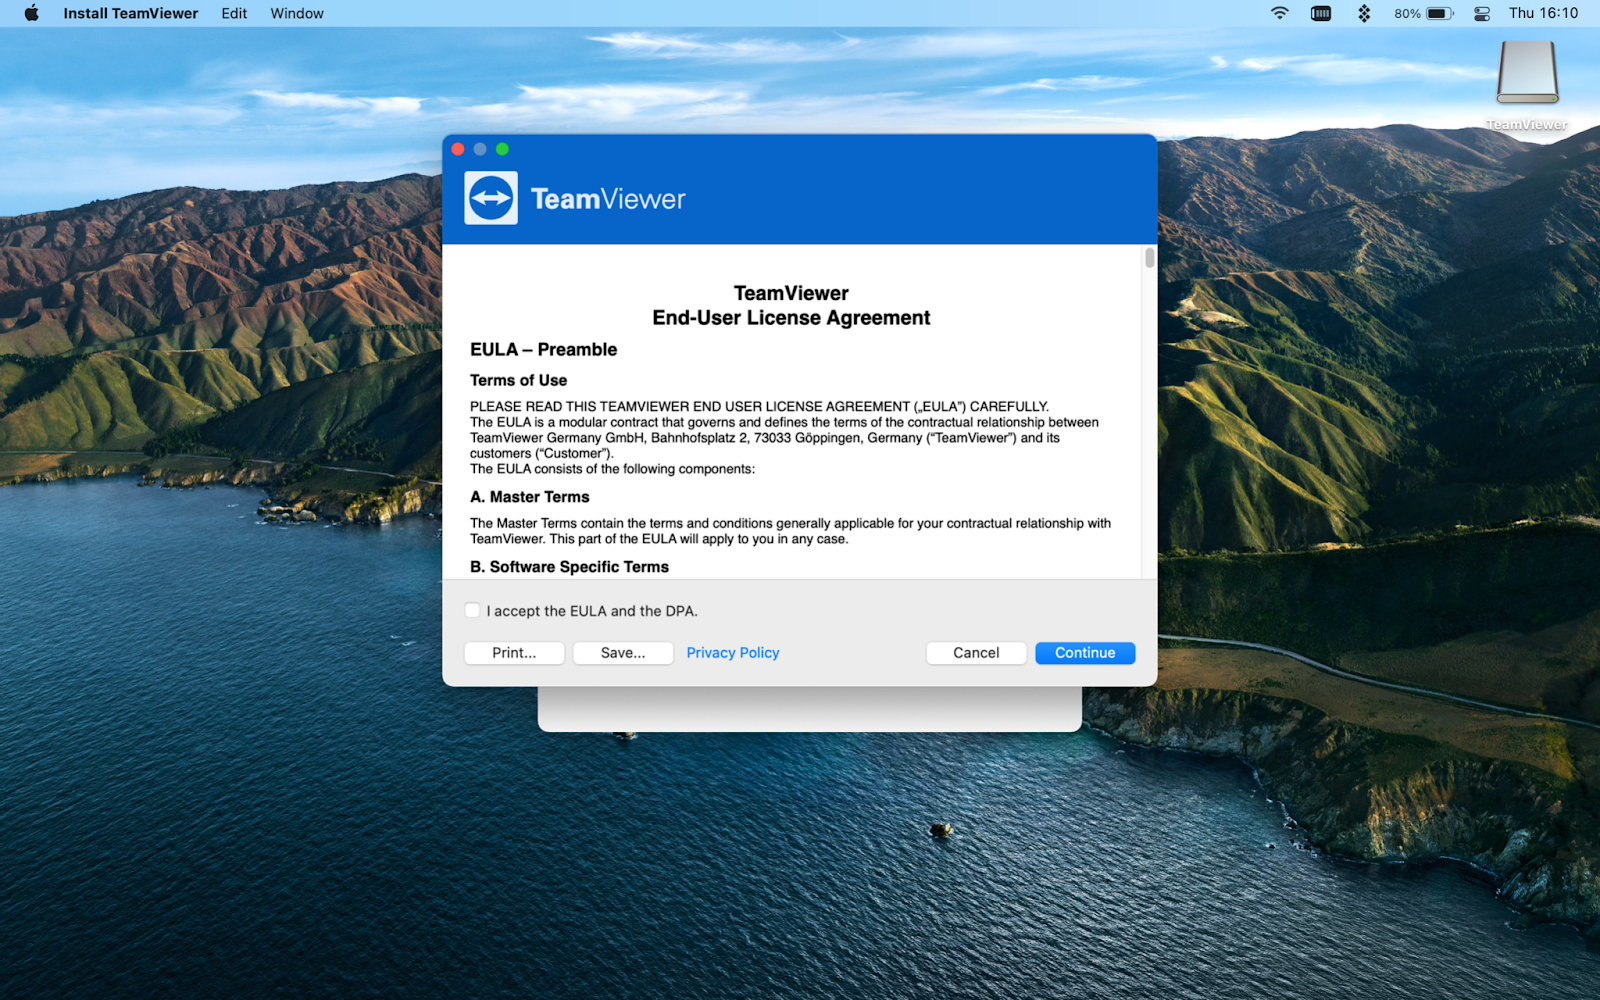 teamviewer-installation-terms-conditions